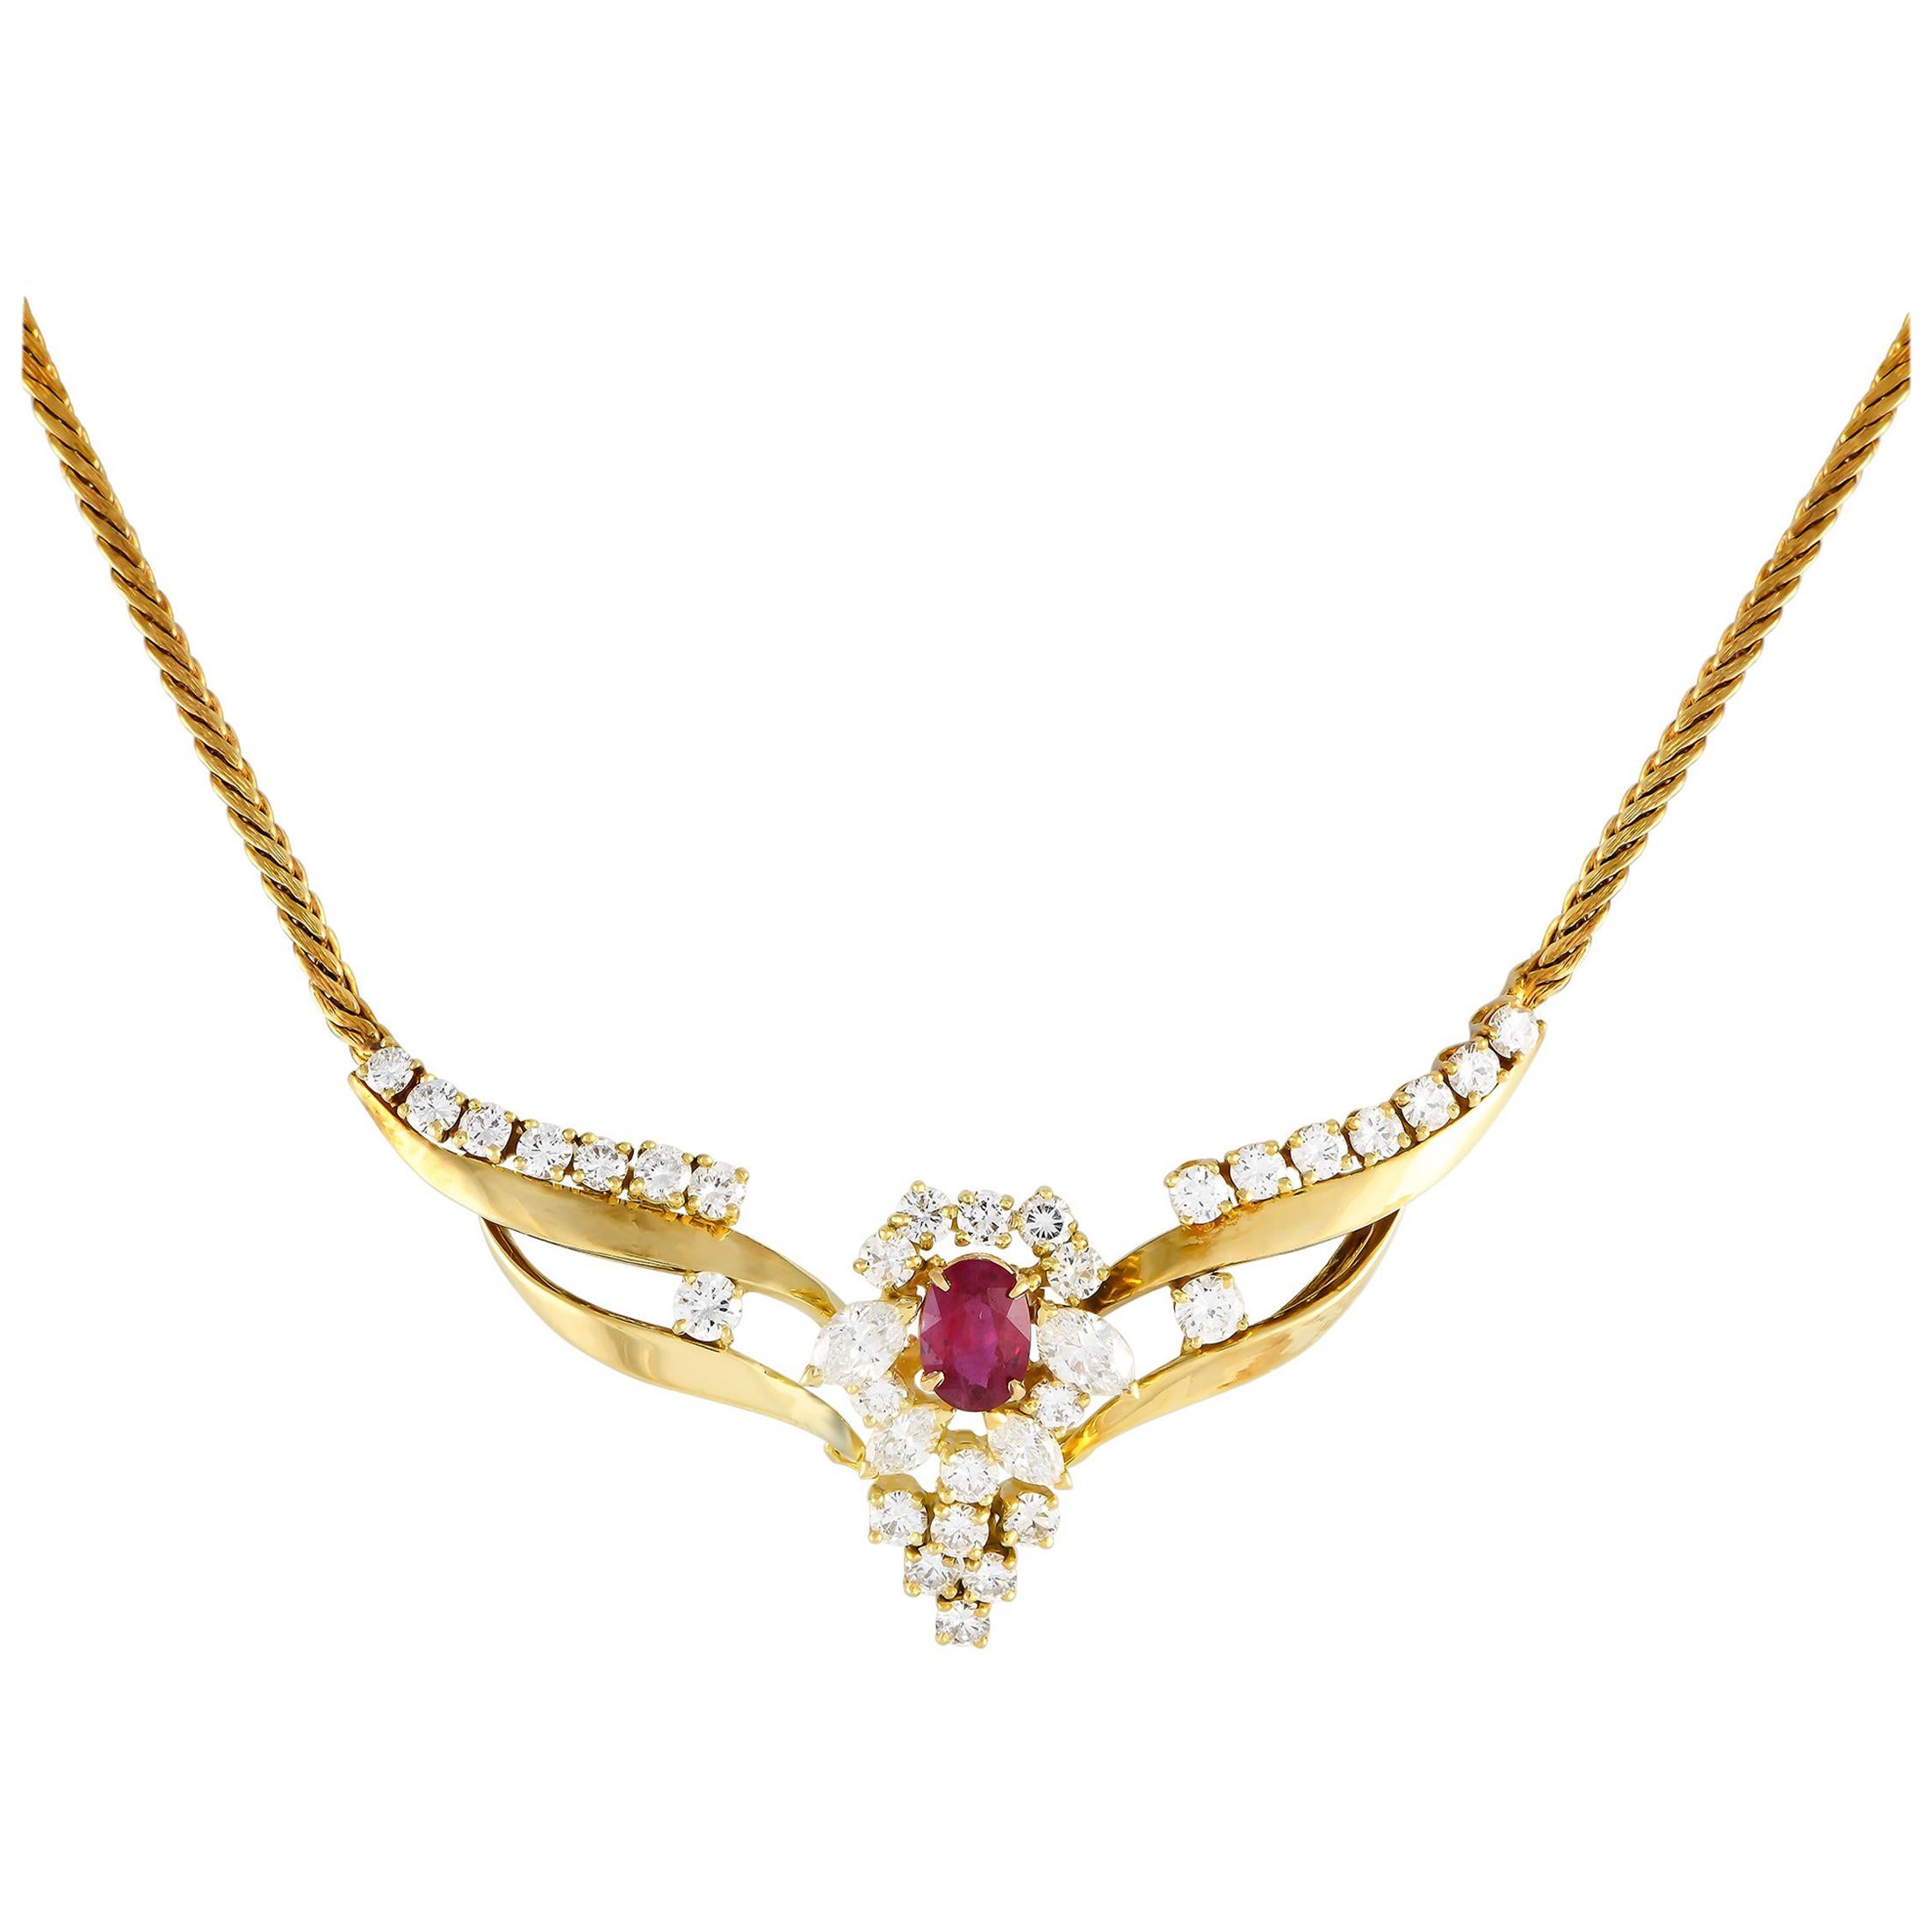 14K Yellow Gold 4.0ct Diamond and Burma Heated Ruby Necklace MF31-012324 For Sale